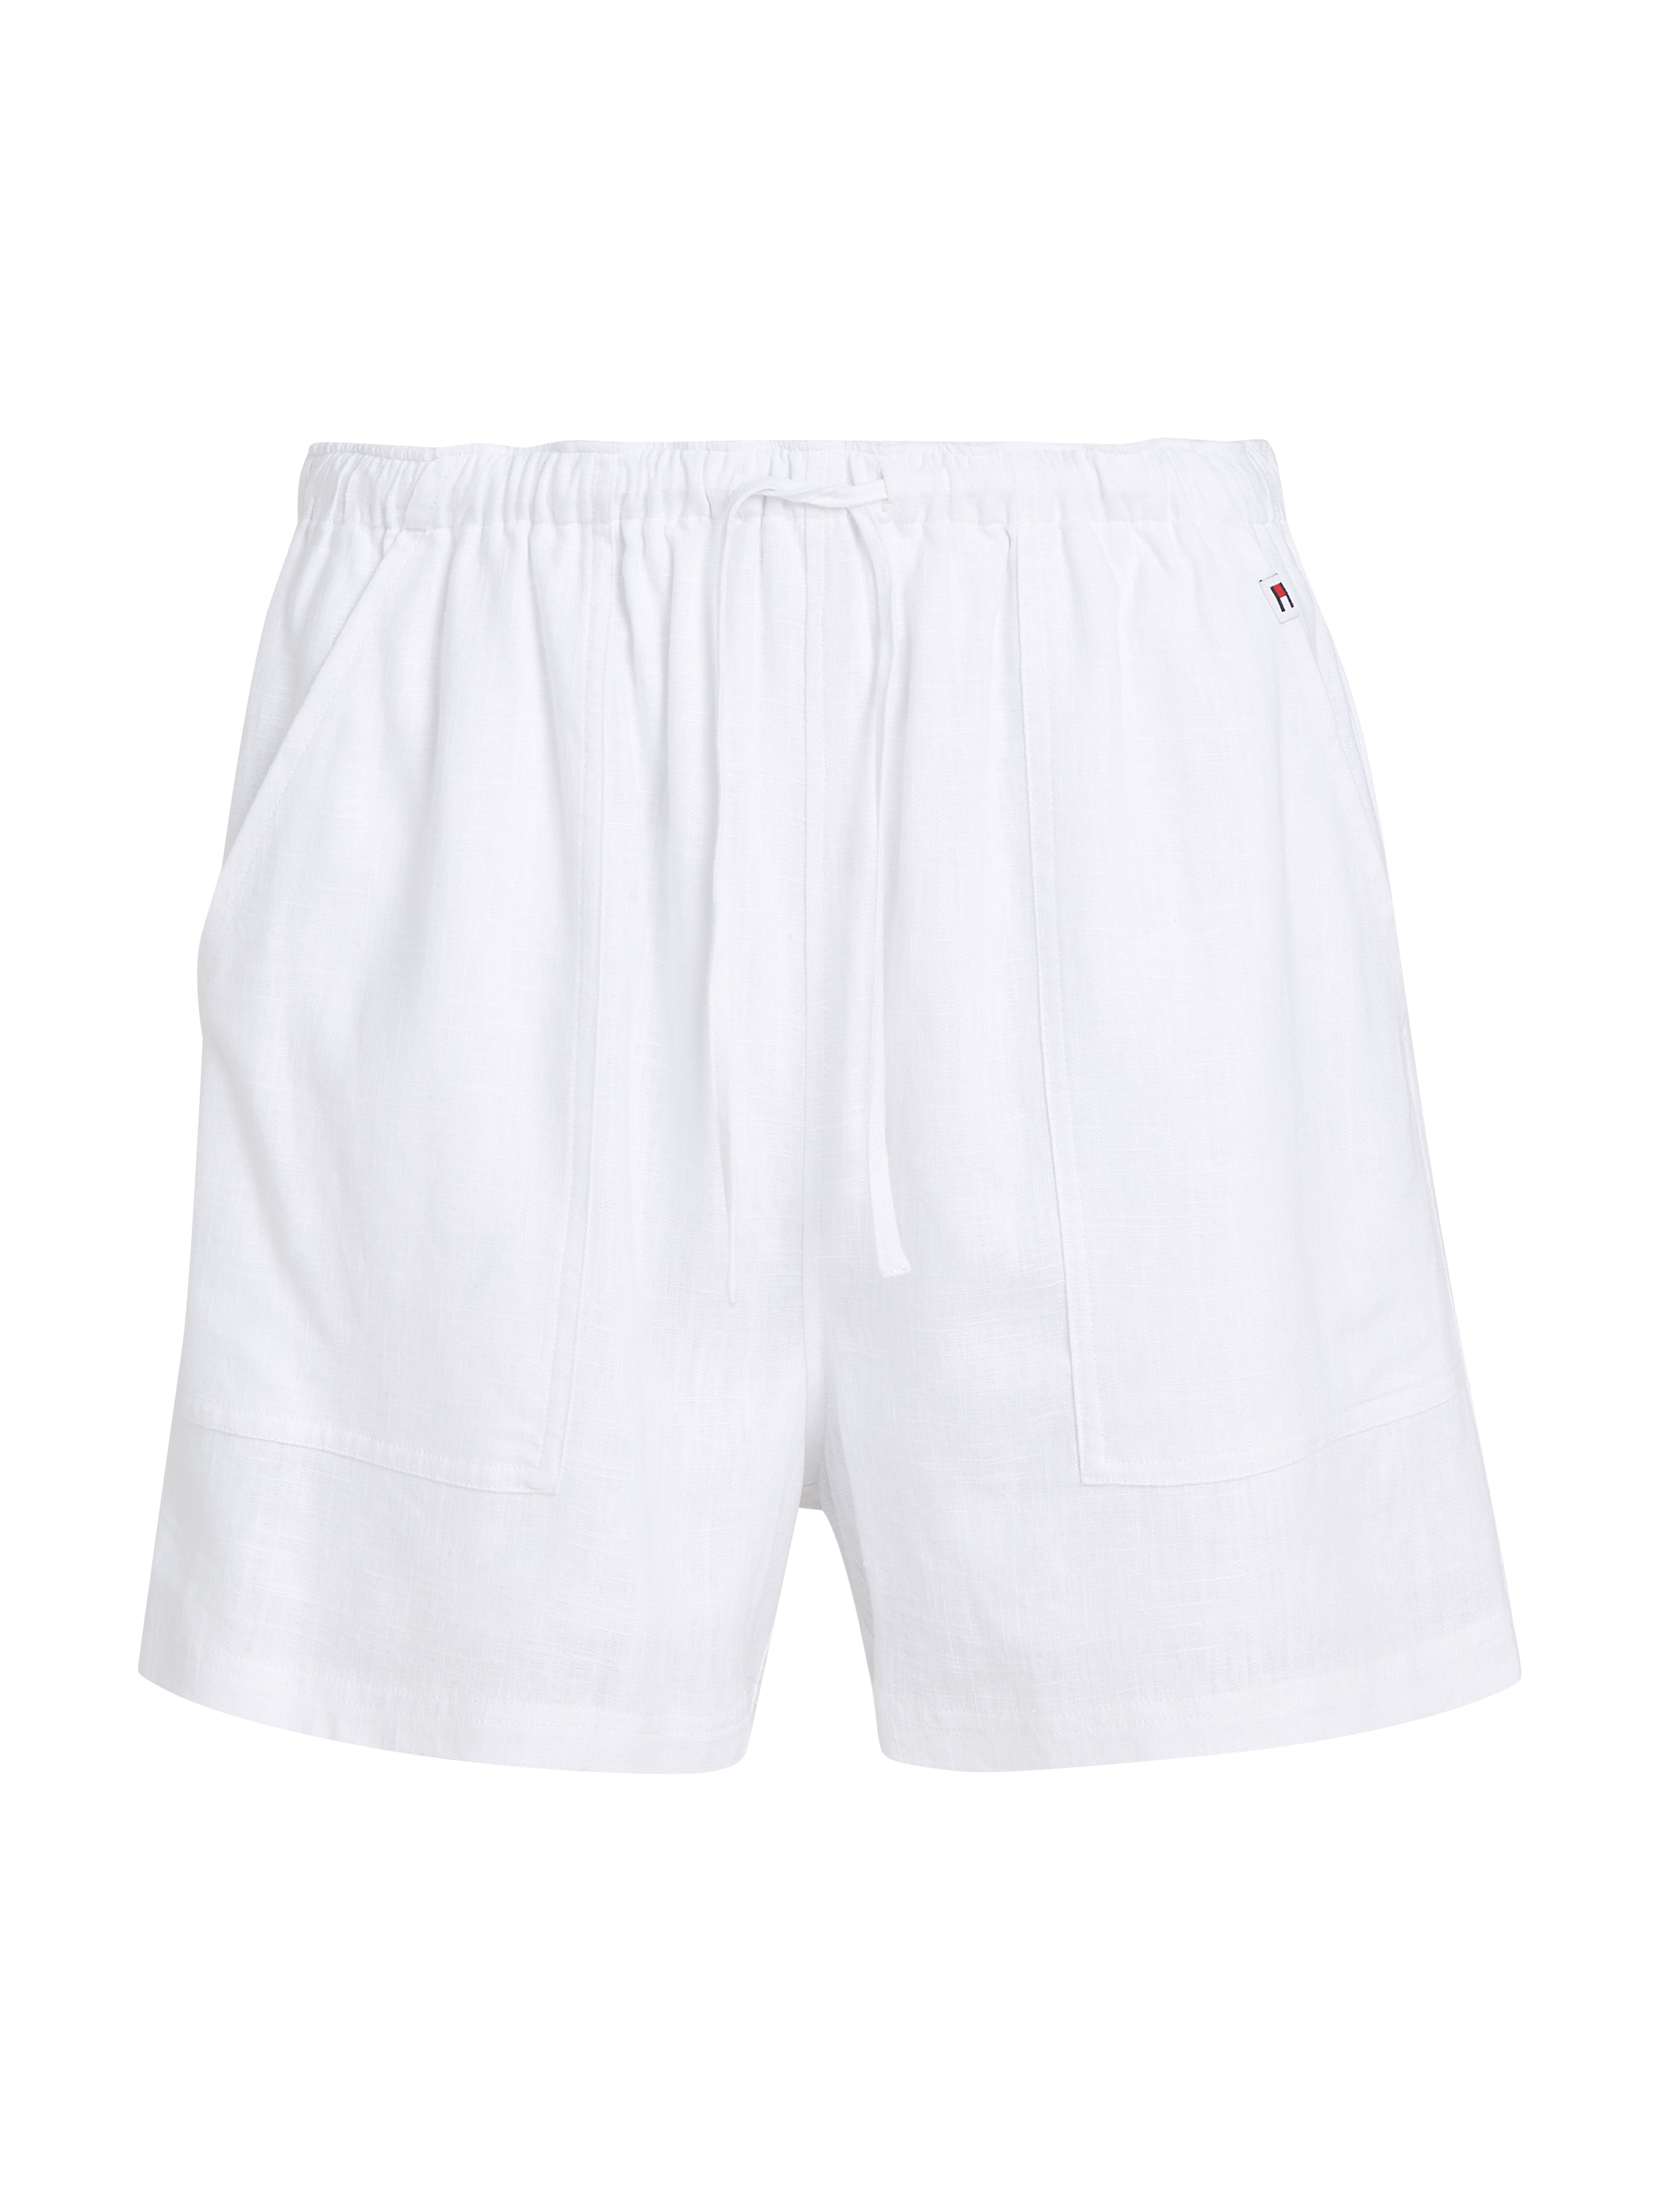 Tommy Jeans Shorts »TJW LINEN SHORT«, mit Tommy Jeans Flagge